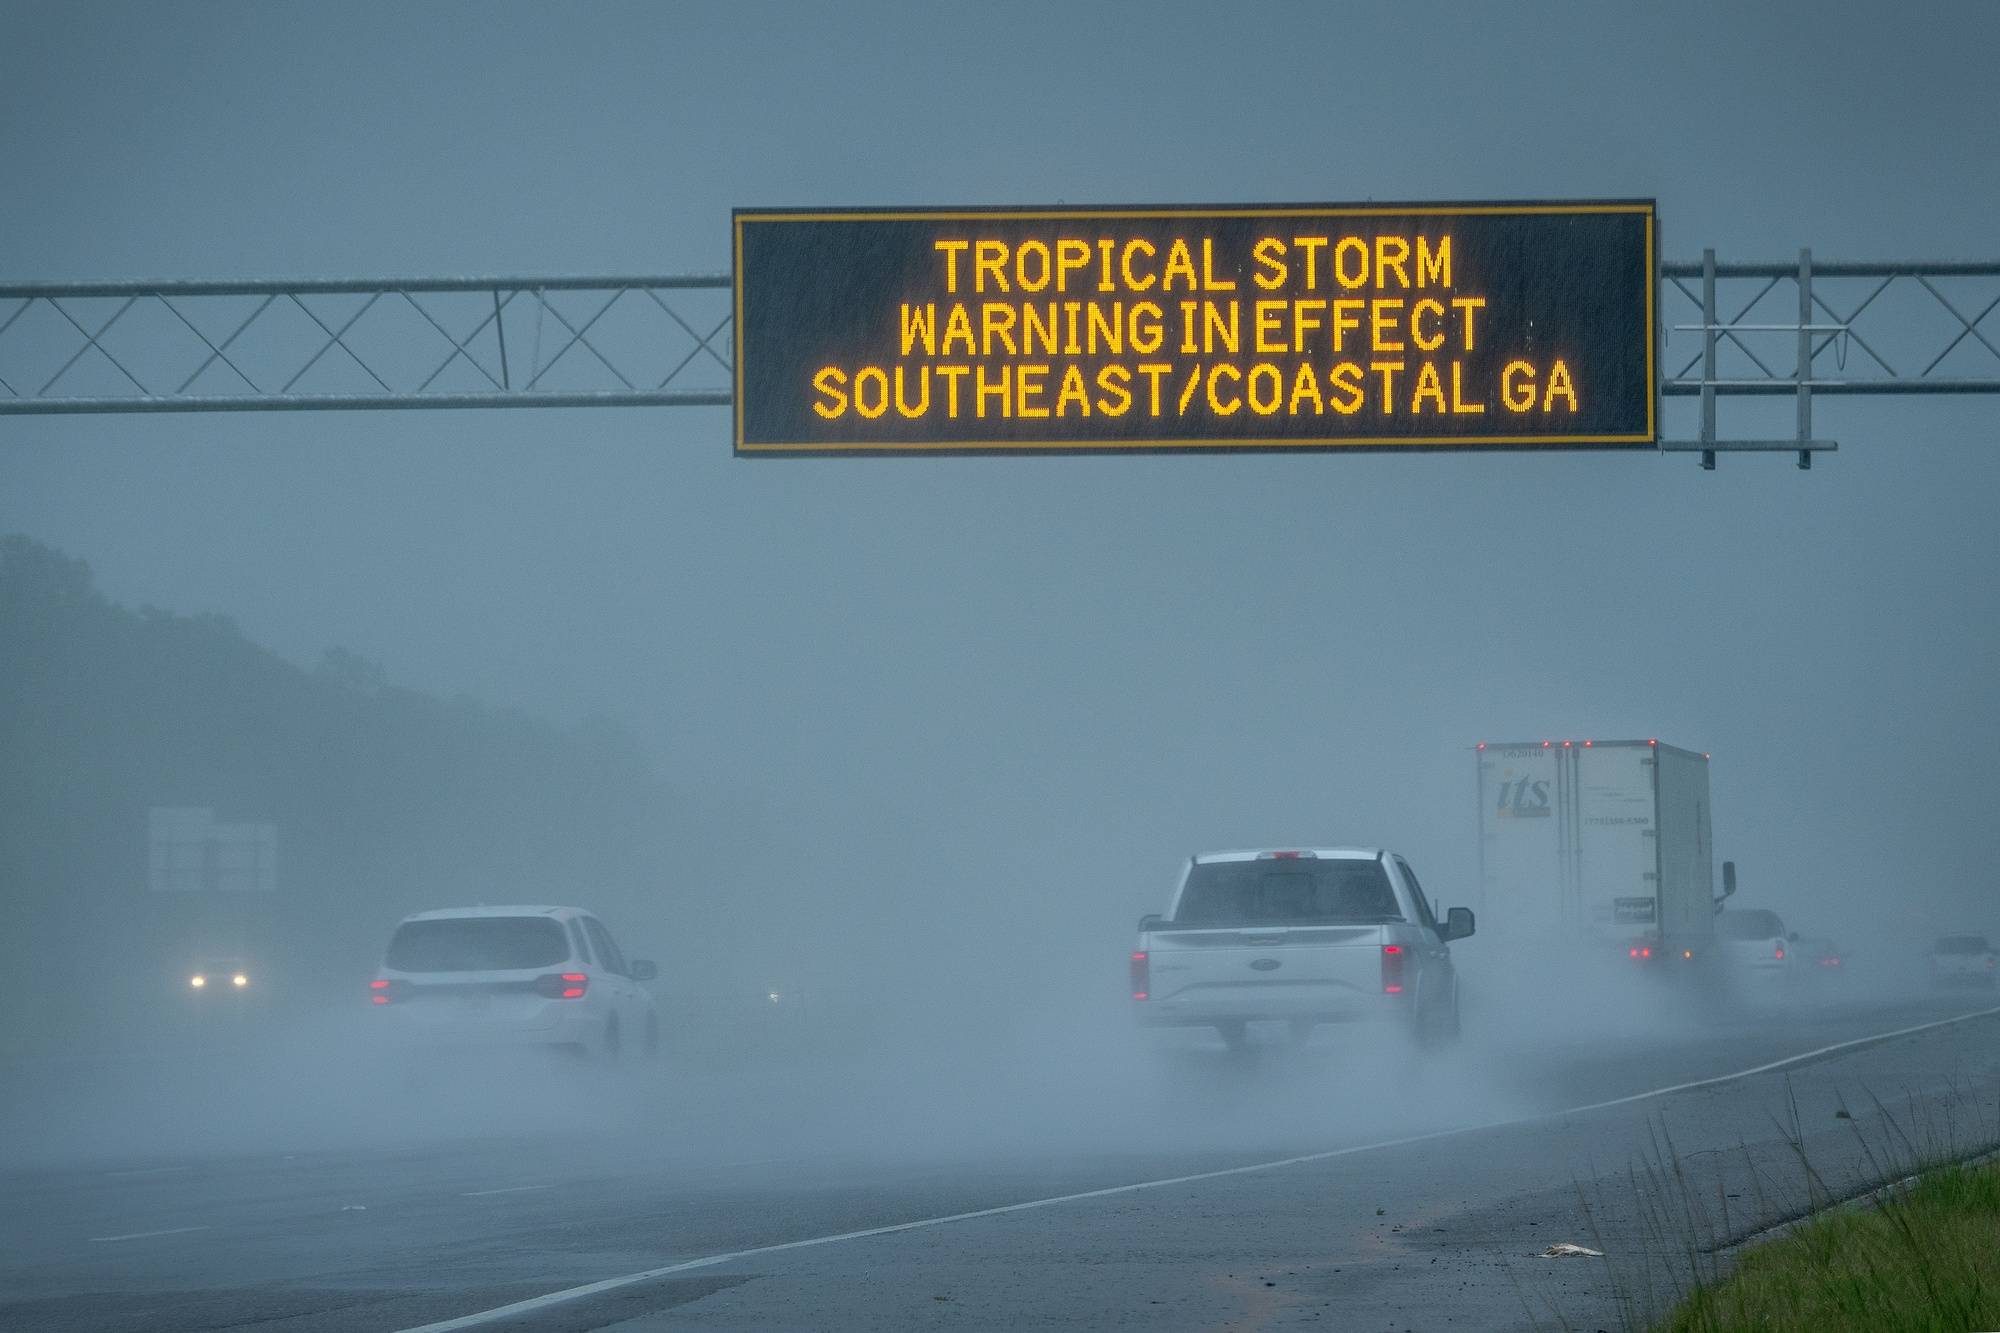 epa11529124 Vehicles pass under a tropical storm warning sign in effect due to tropical storm Debby in Waverly, Georgia, USA, 05 August 2024. Debby made landfall in Florida&#039;s Big Bend as a hurricane and is now a tropical storm that can produce potentially historic heavy rainfall across southeast Georgia, part of South Carolina and southeast North Carolina according to the National Hurricane Center.  EPA/CRISTOBAL HERRERA-ULASHKEVICH